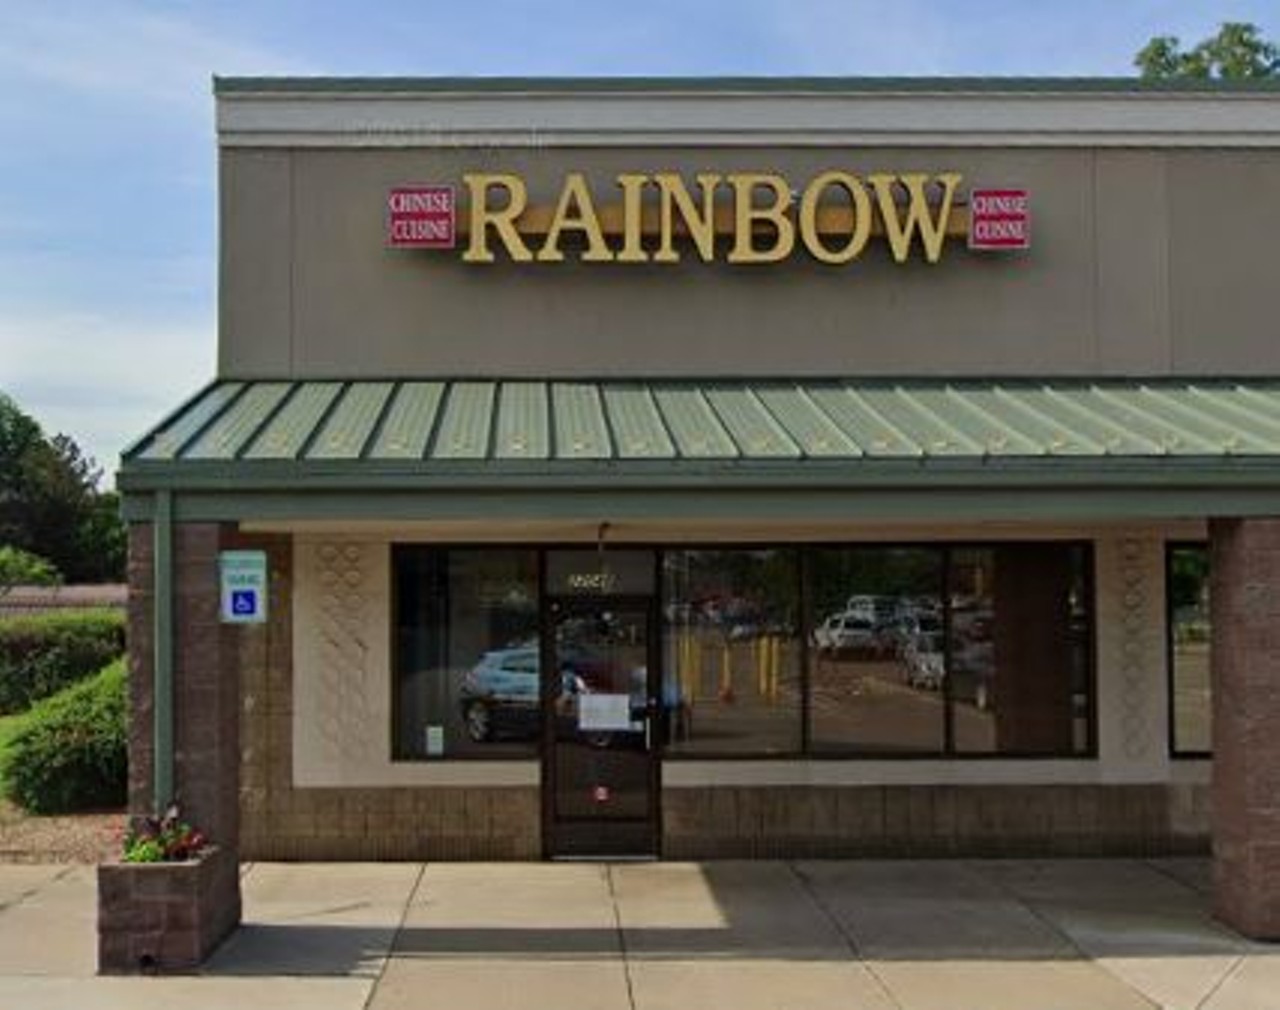 Rainbow Restaurant
22048 Farmington Rd., Farmington (Farmington Crossroads); 248-427-8265; raindowfarmington.com
With affordable lunch and dinner options, Rainbow gives you the option to order from a large selection of entrees or combo meals, which feature chicken, shrimp, or veggies.
Photo via GoogleMaps